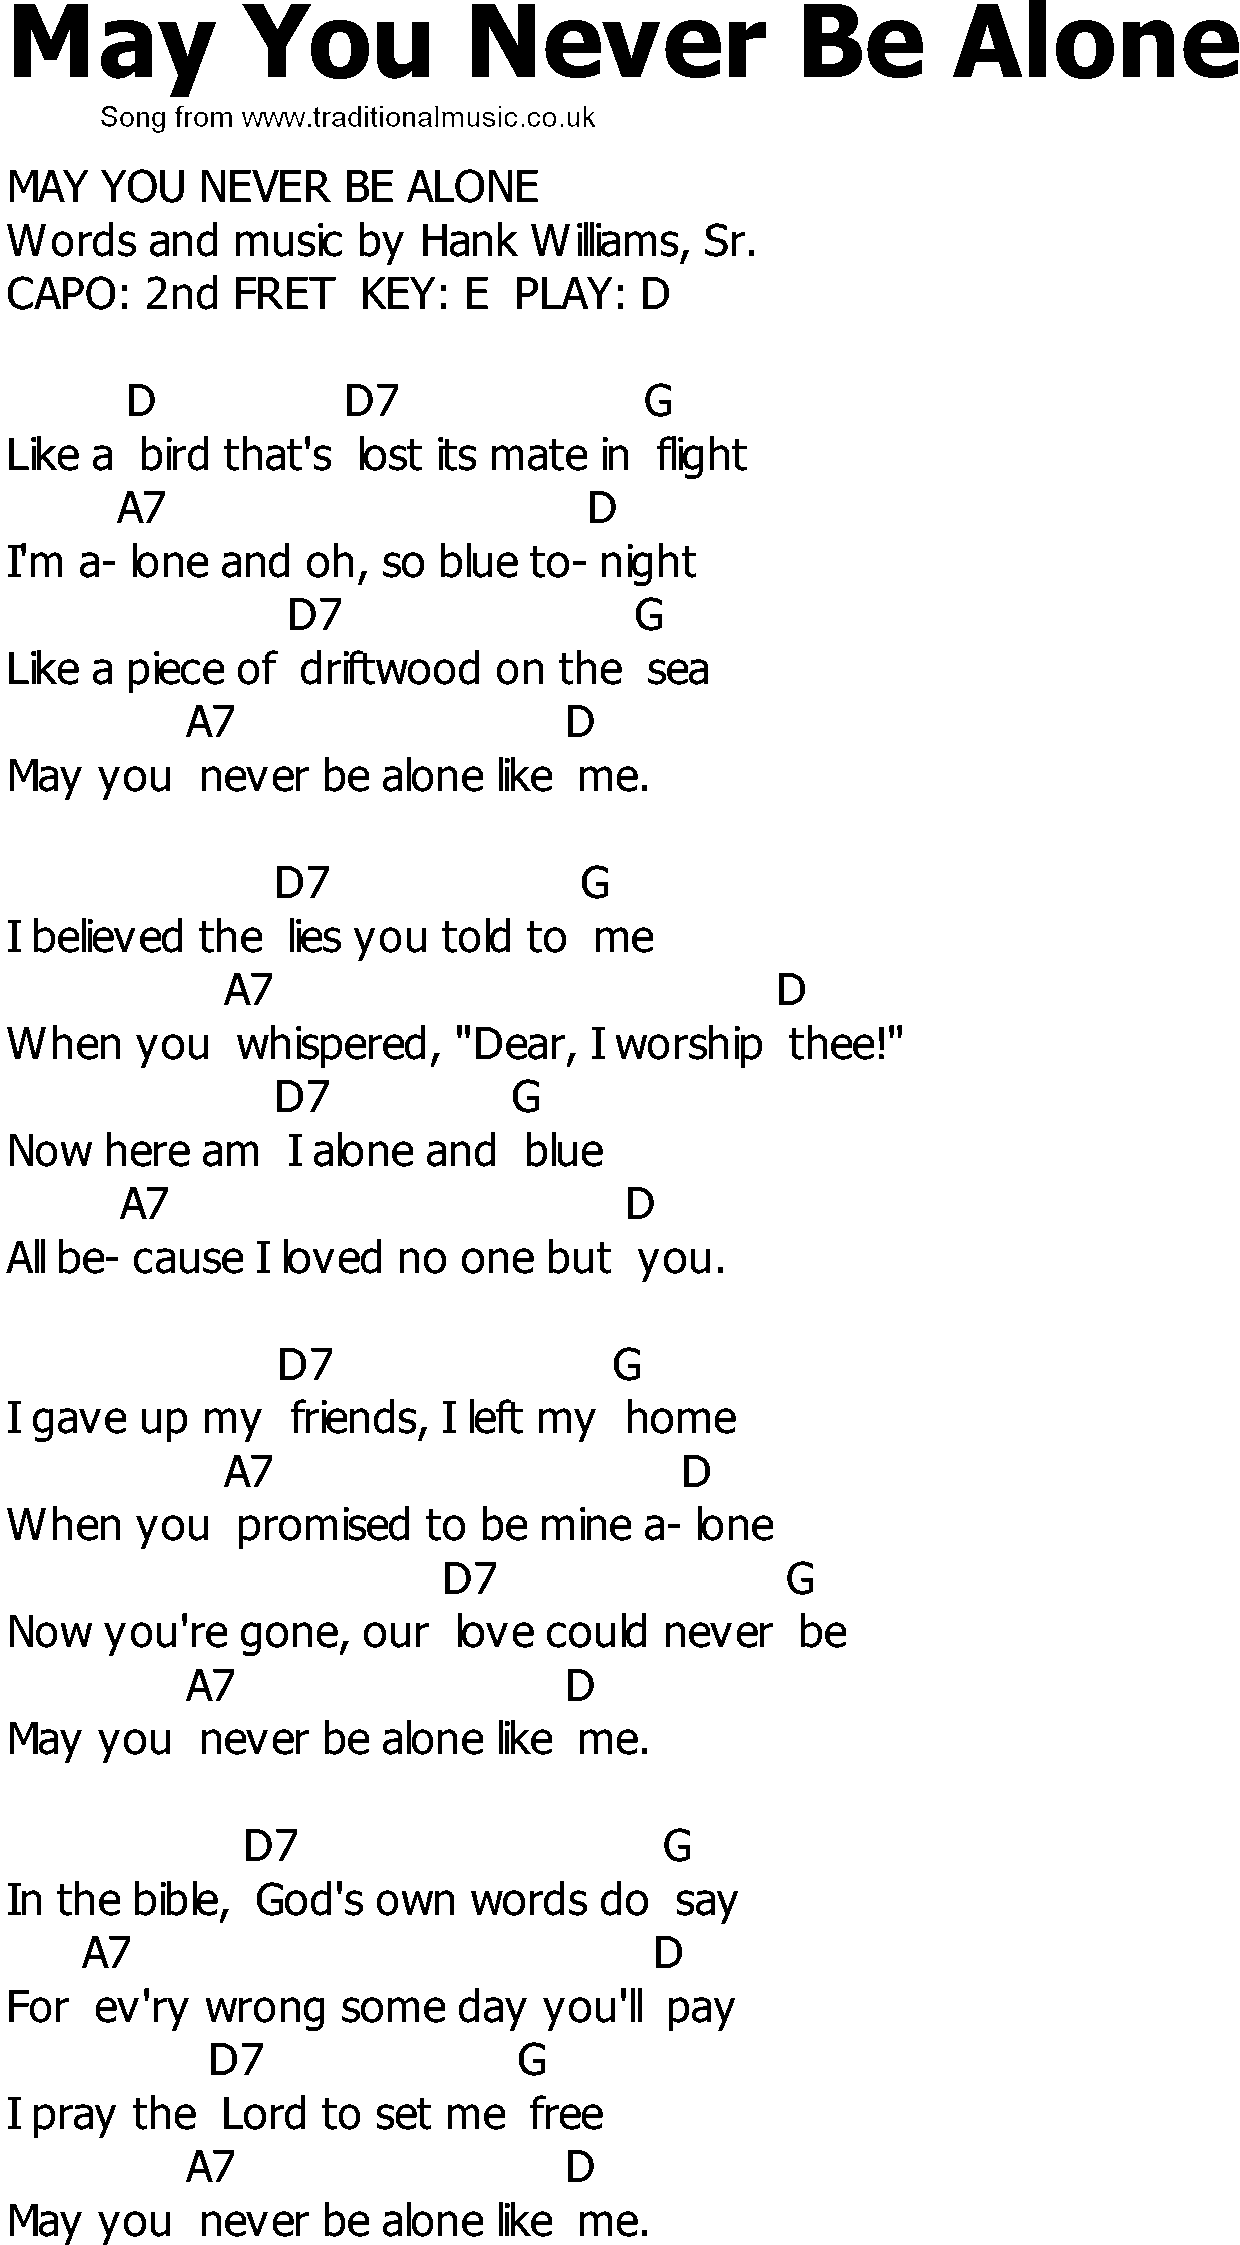 Old Country song lyrics with chords - May You Never Be Alone